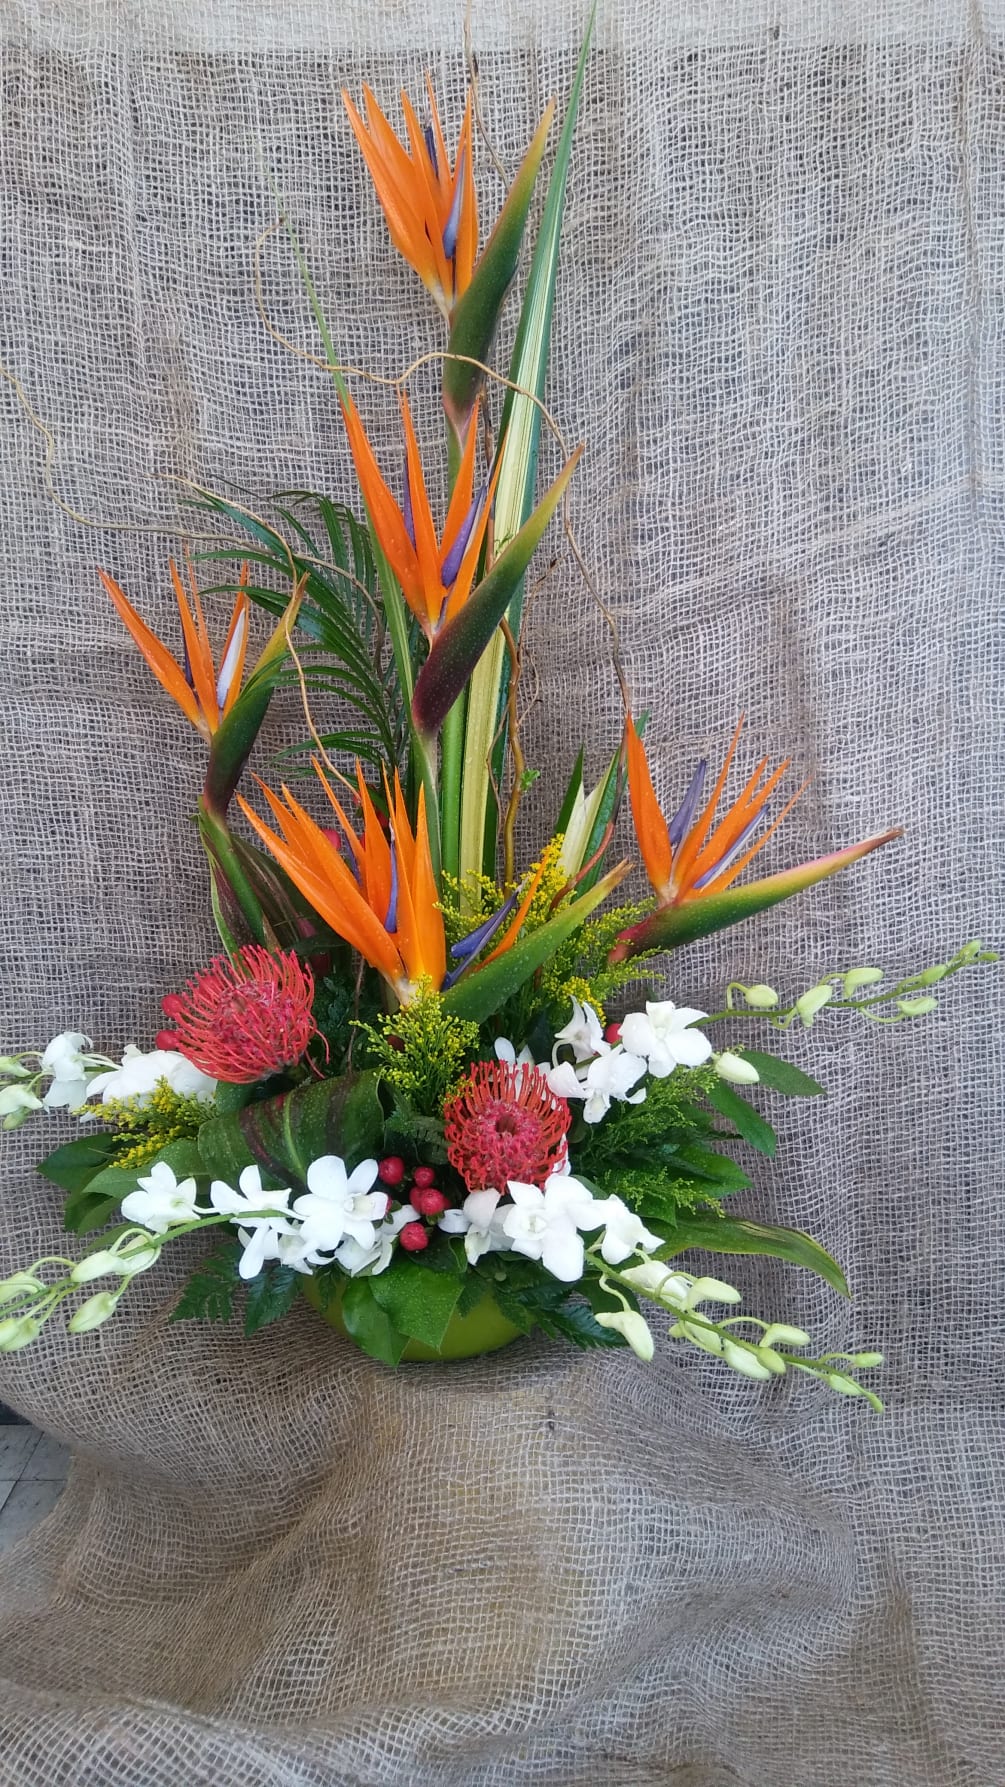 Birds of Paradise, White Dendrobium Orchids and Exotic Greens and Fillers
Note: Seasonal